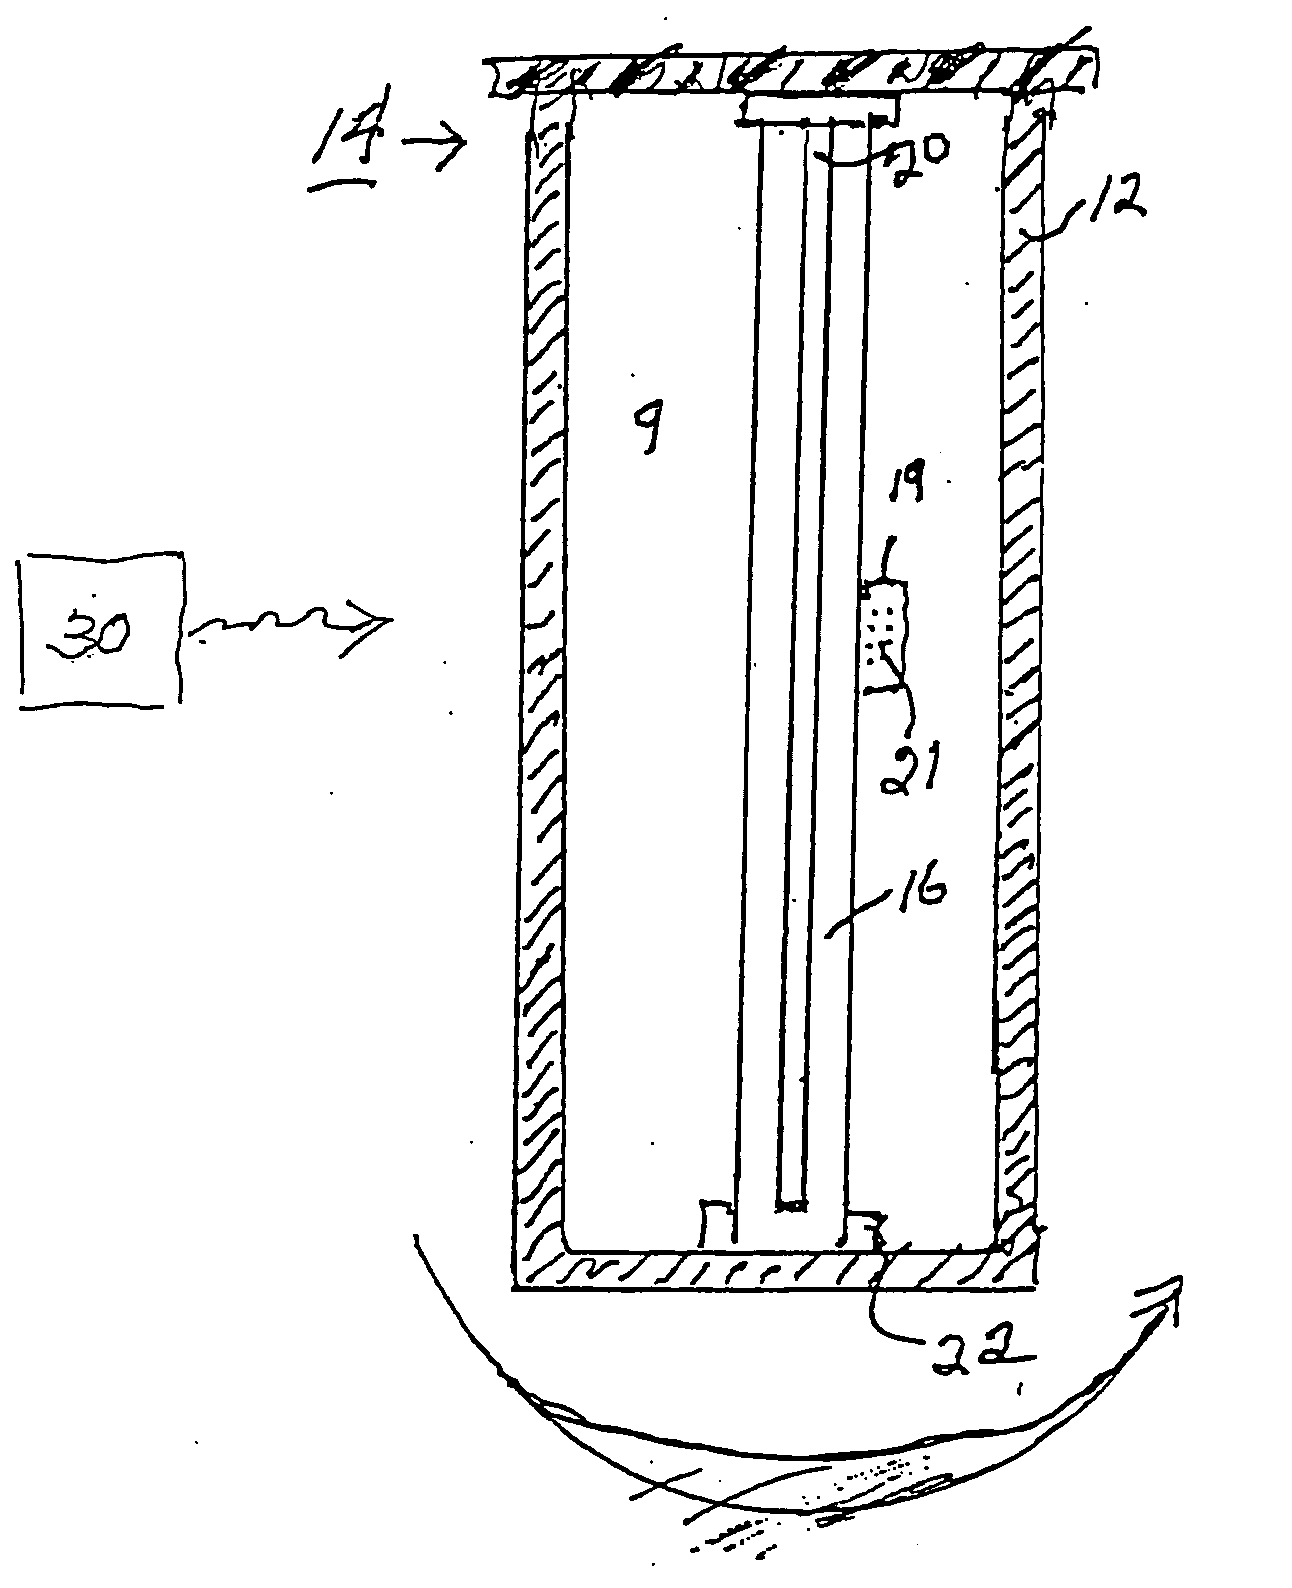 Canister-type dosimeter and multidimensional mapping of absolute radiation dosage distribution using said dosimeter